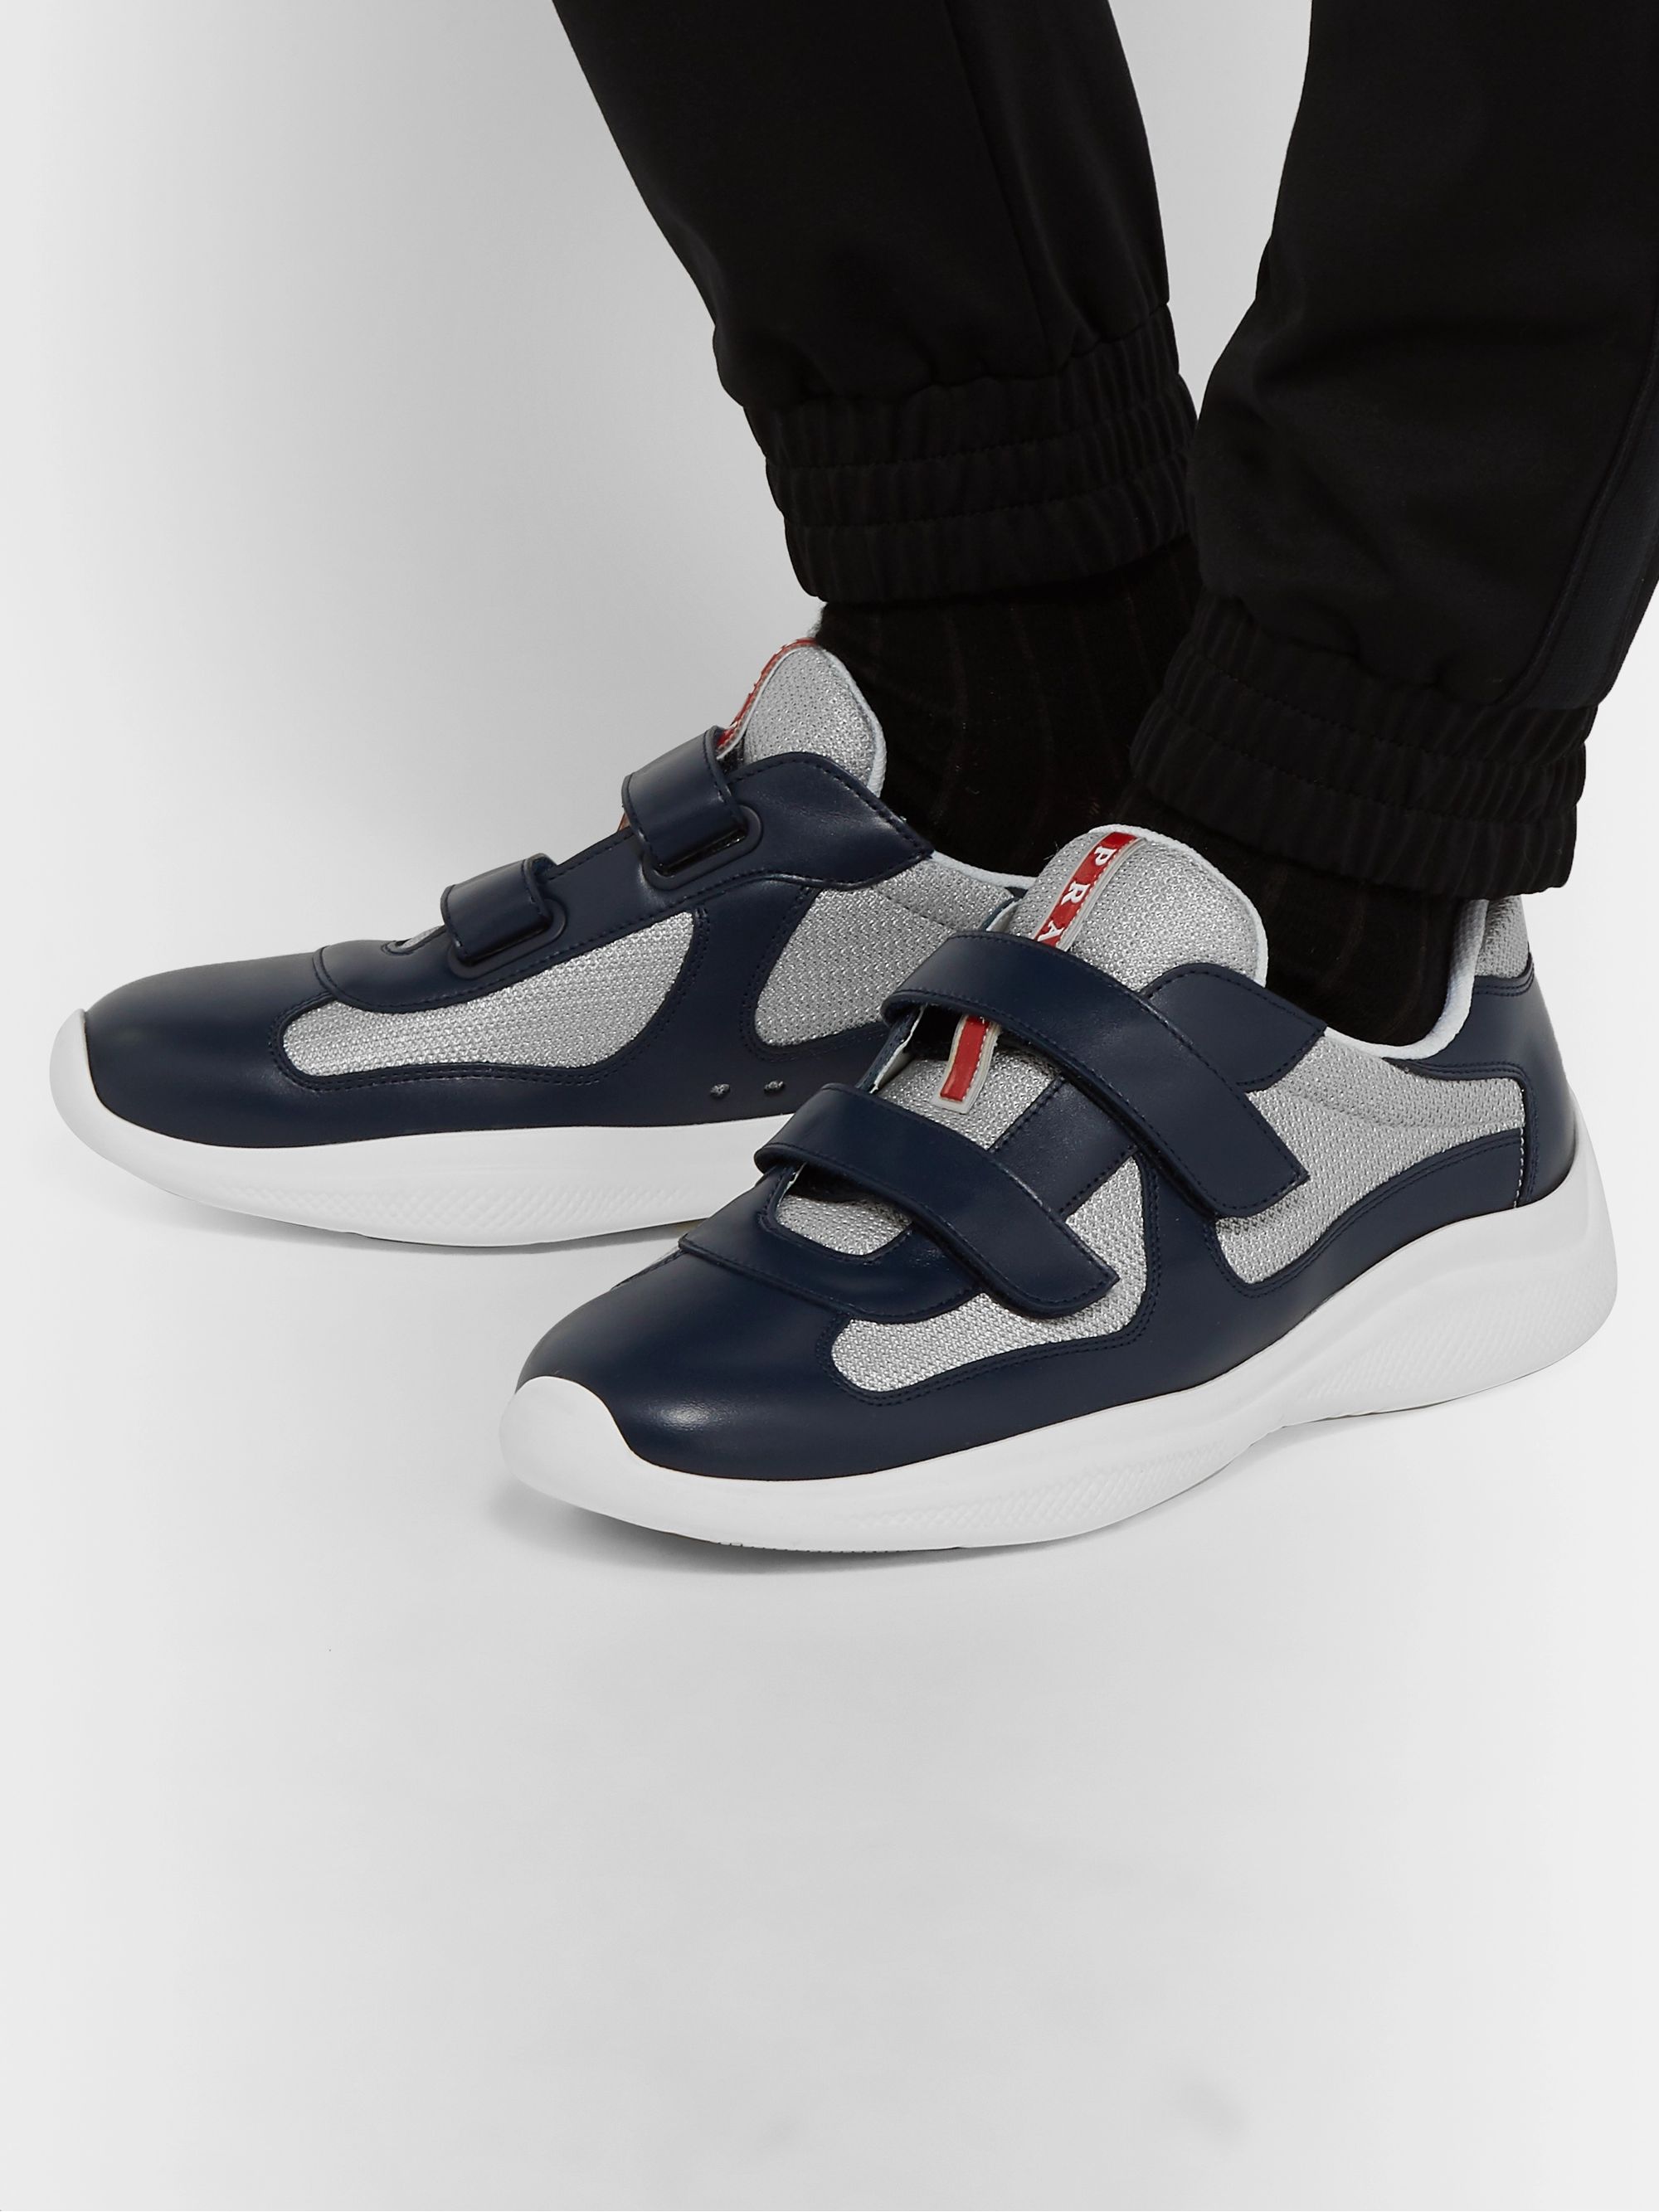 prada america's cup leather and mesh sneakers